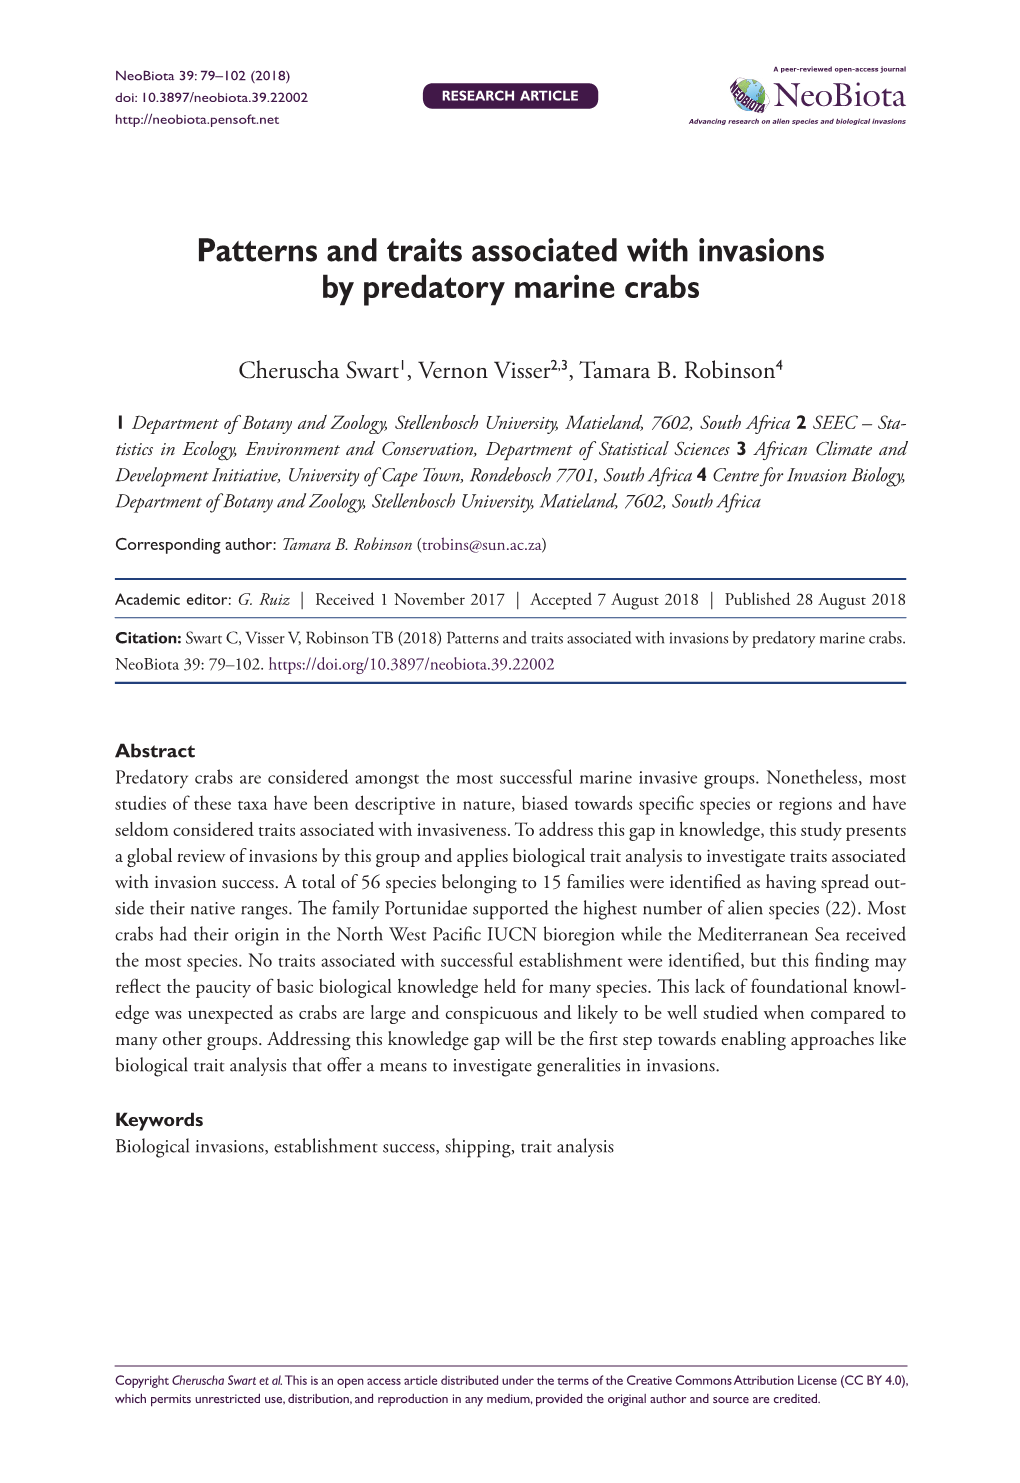 ﻿Patterns and Traits Associated with Invasions by Predatory Marine Crabs